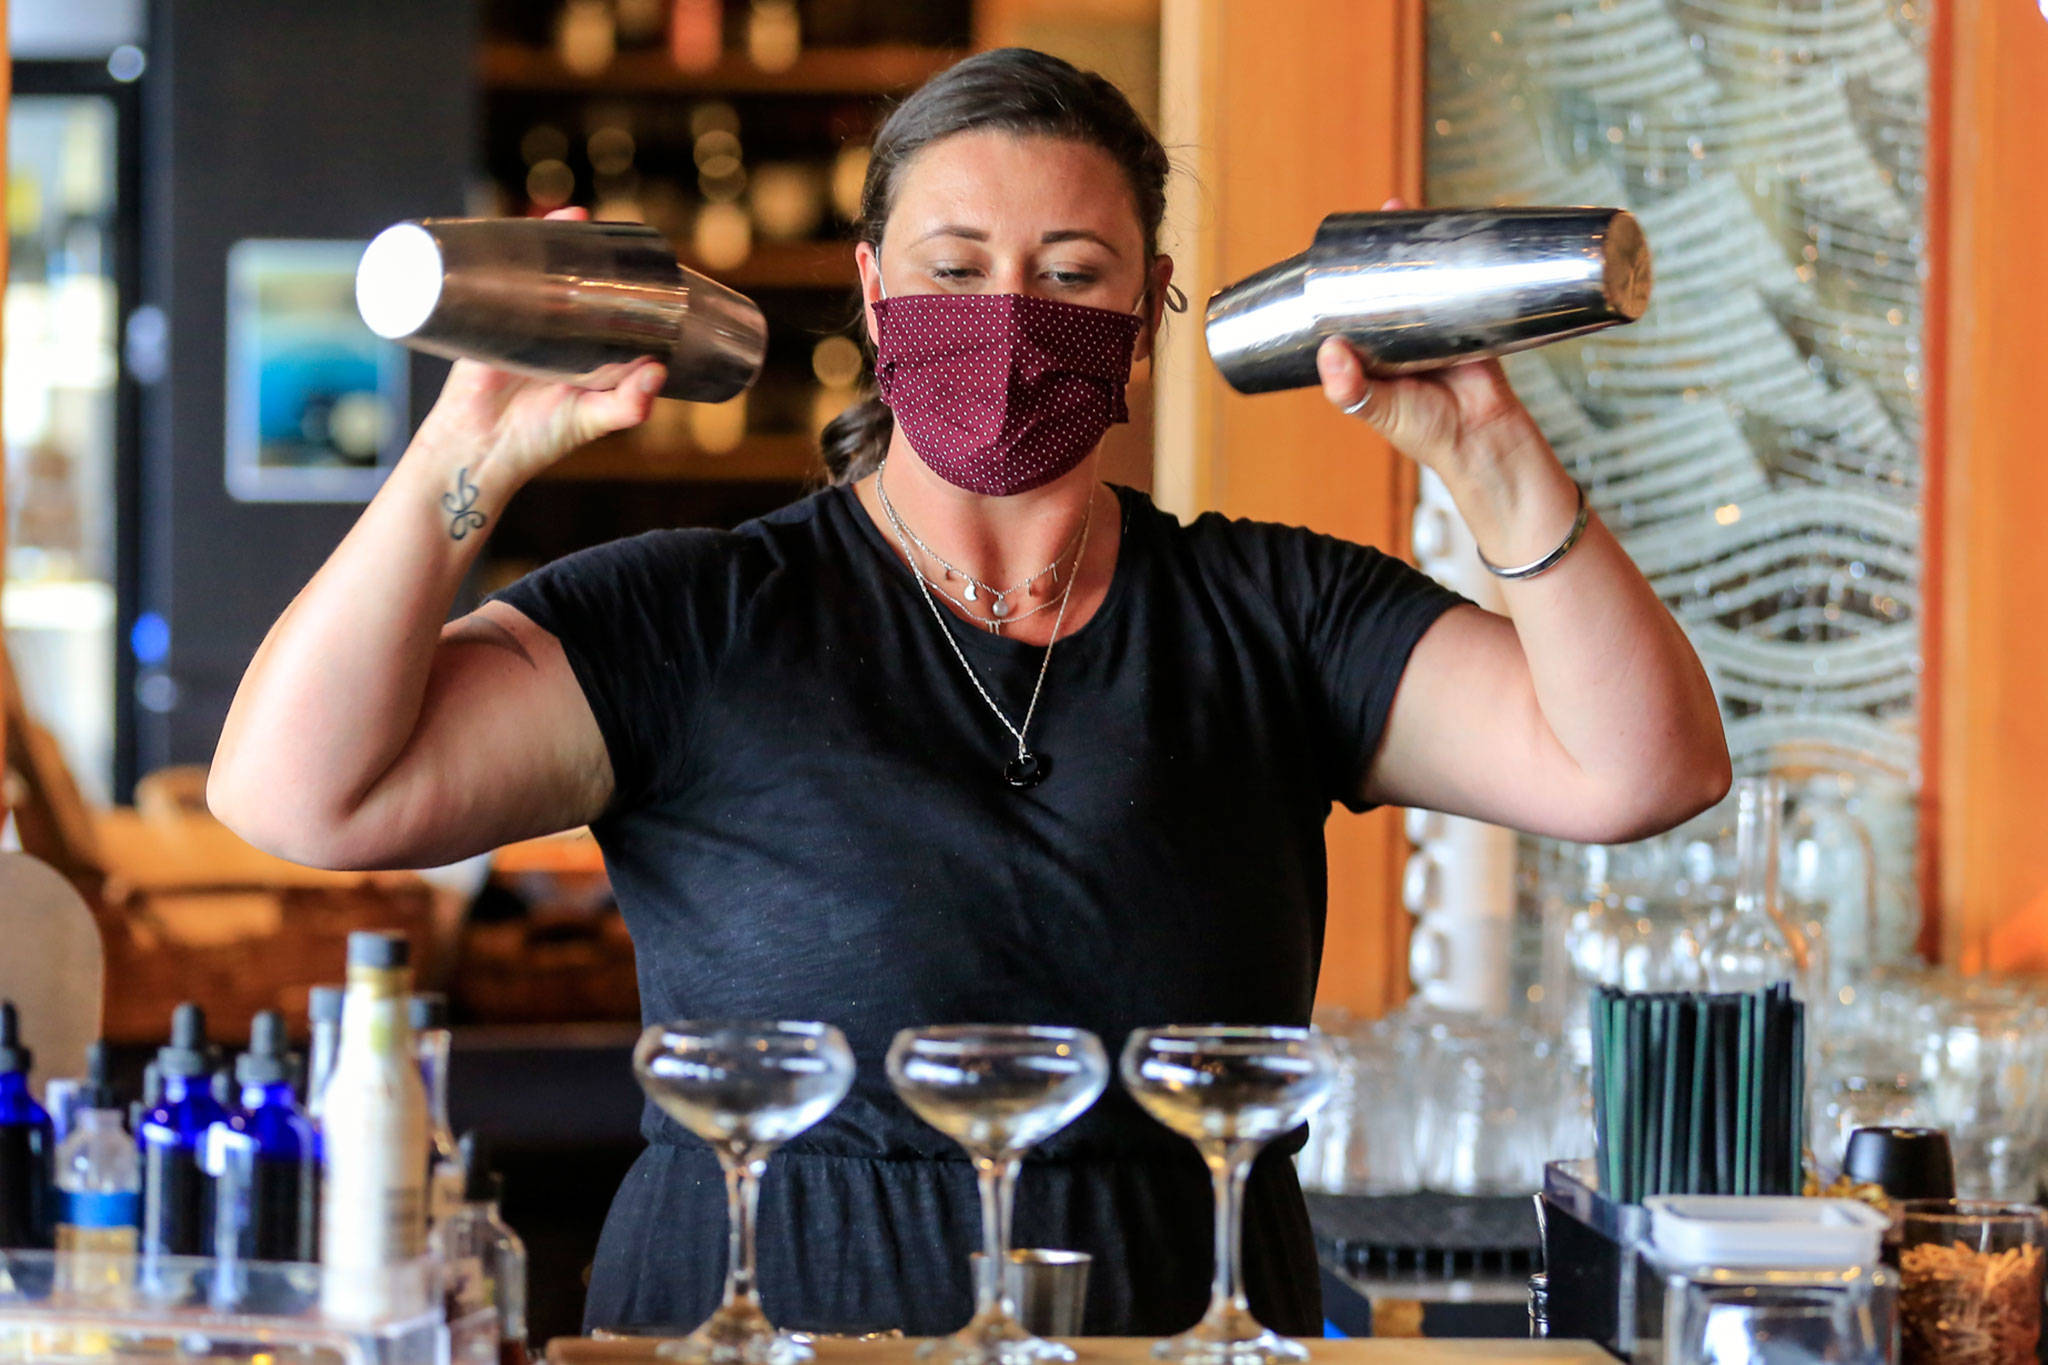 Madison Bauer mixes drinks at Bluewater Organic Distilling in Everett. (Kevin Clark / The Herald)